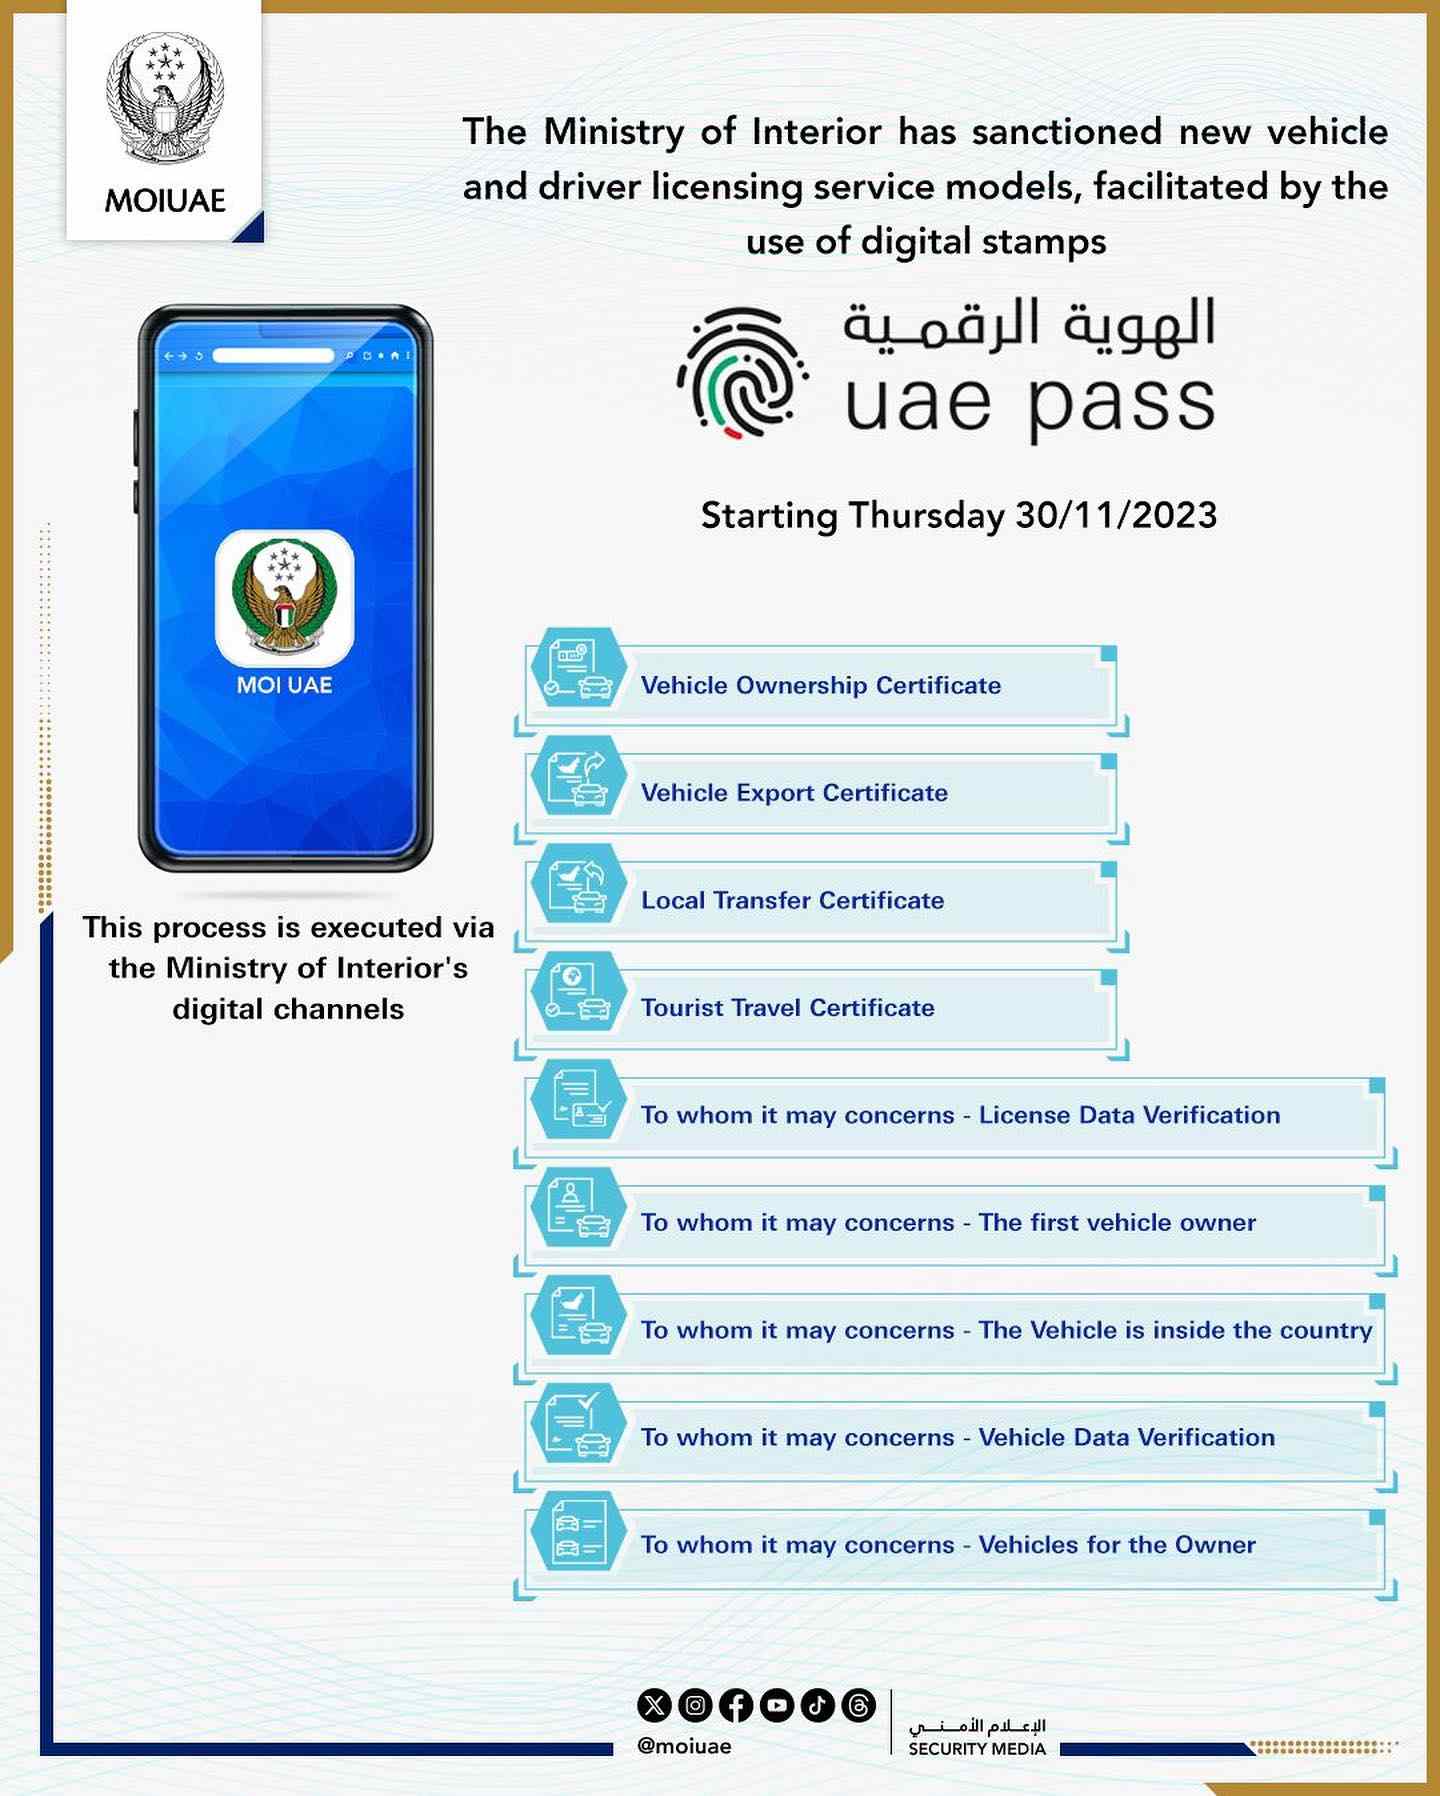 MOI activates digital stamp for vehicle and driver licensing services